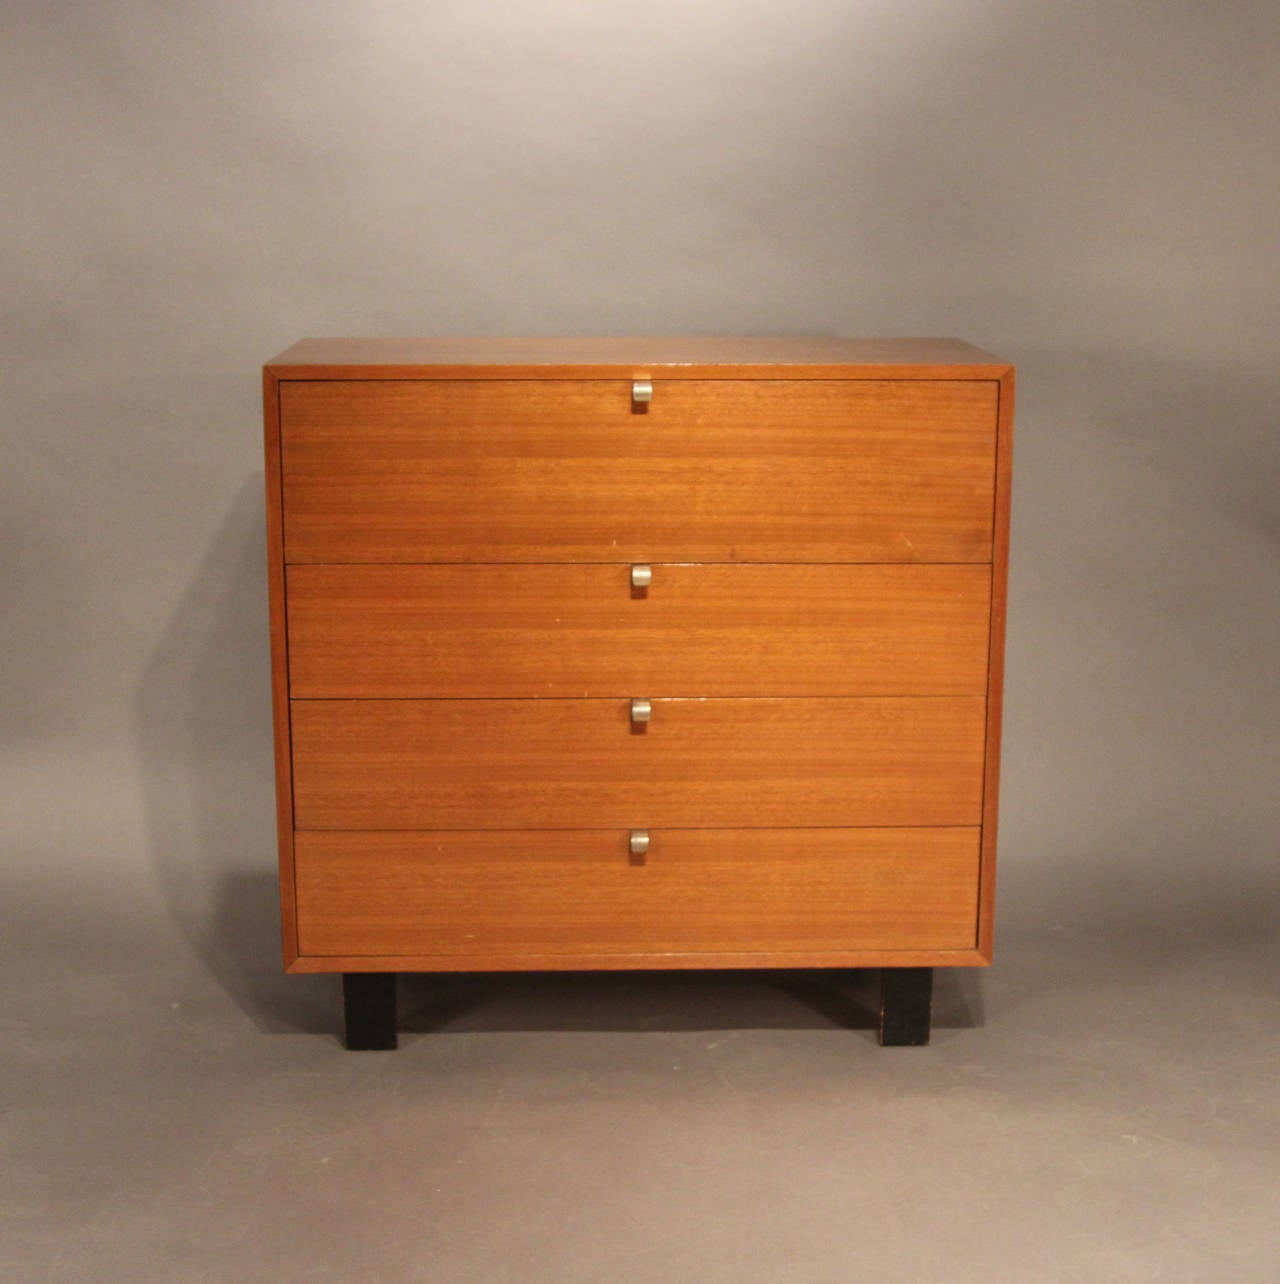 Three drawer dresser chest with fourth drawer being a drop down secretary with desk organizer compartments. Brass pulls, black painted legs. A true example of Mid-Century design and function.